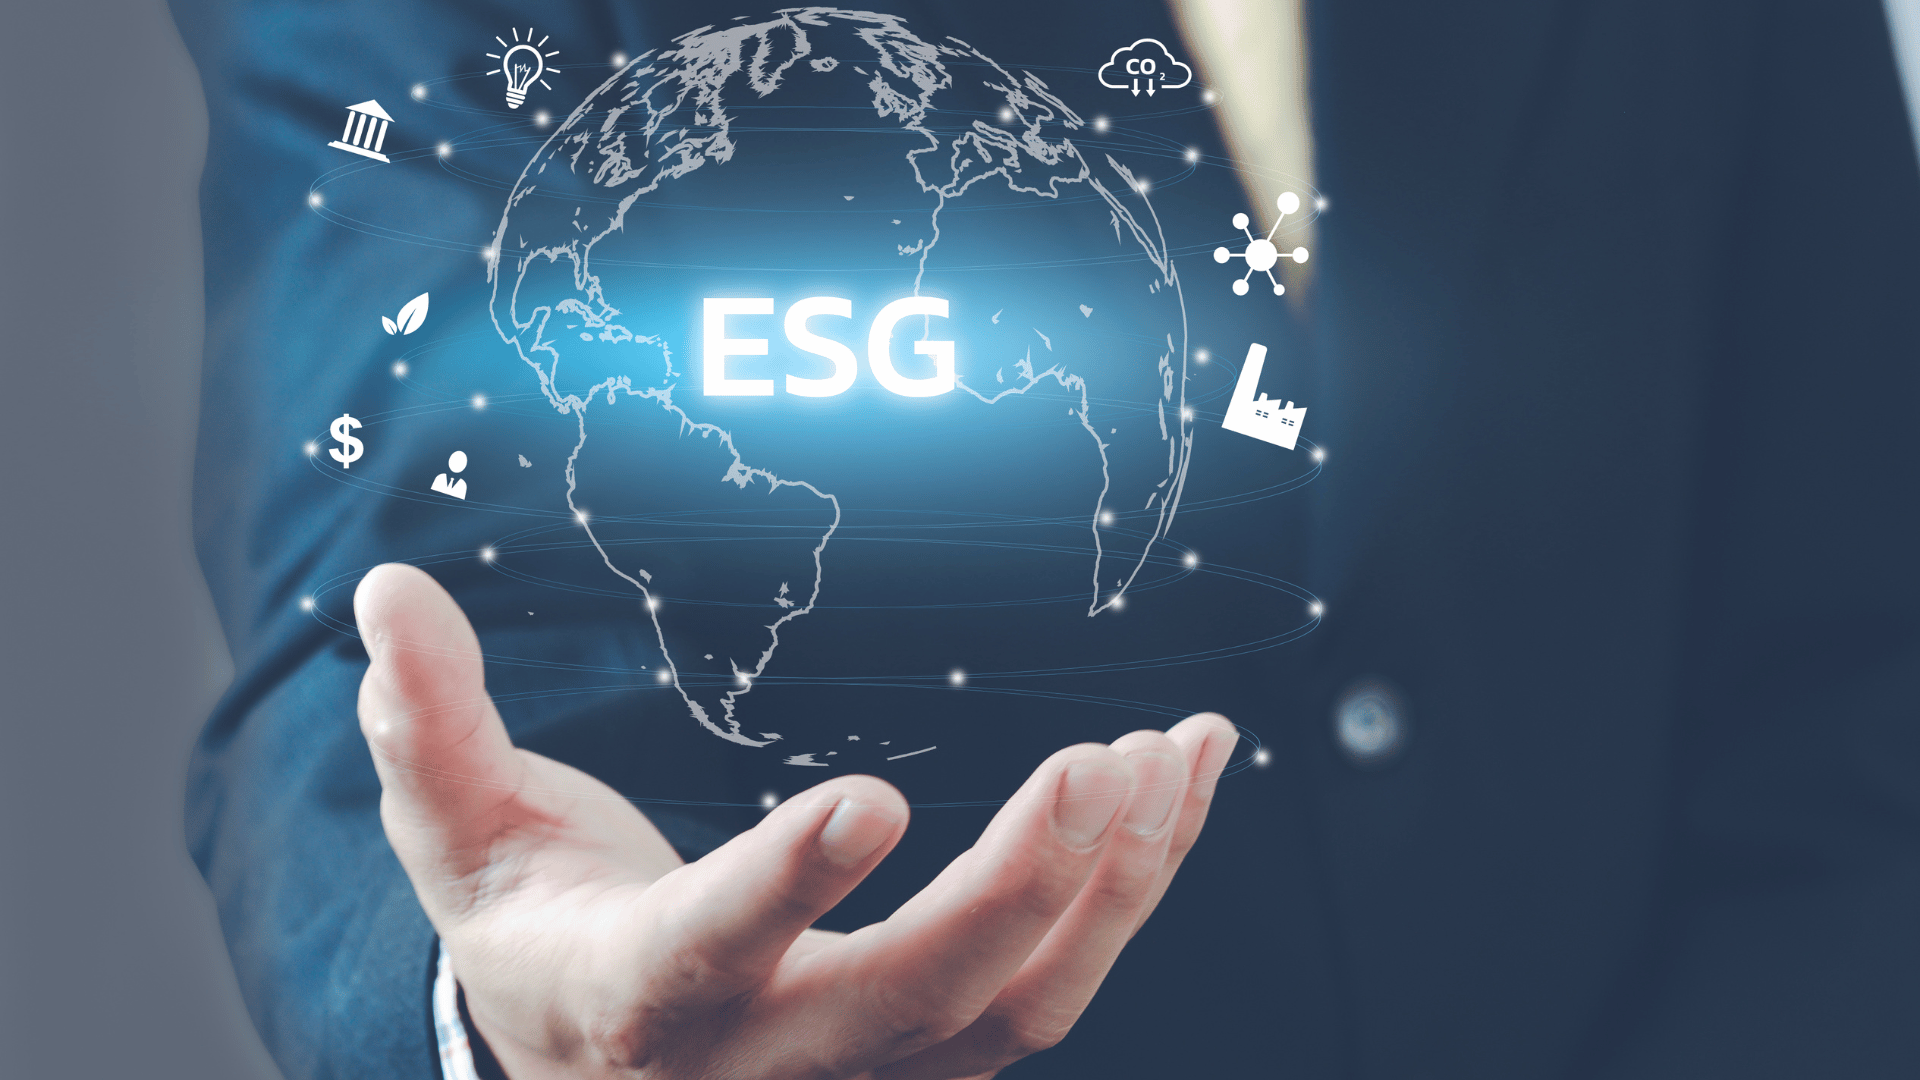 ESG in text and sustainable-related icons